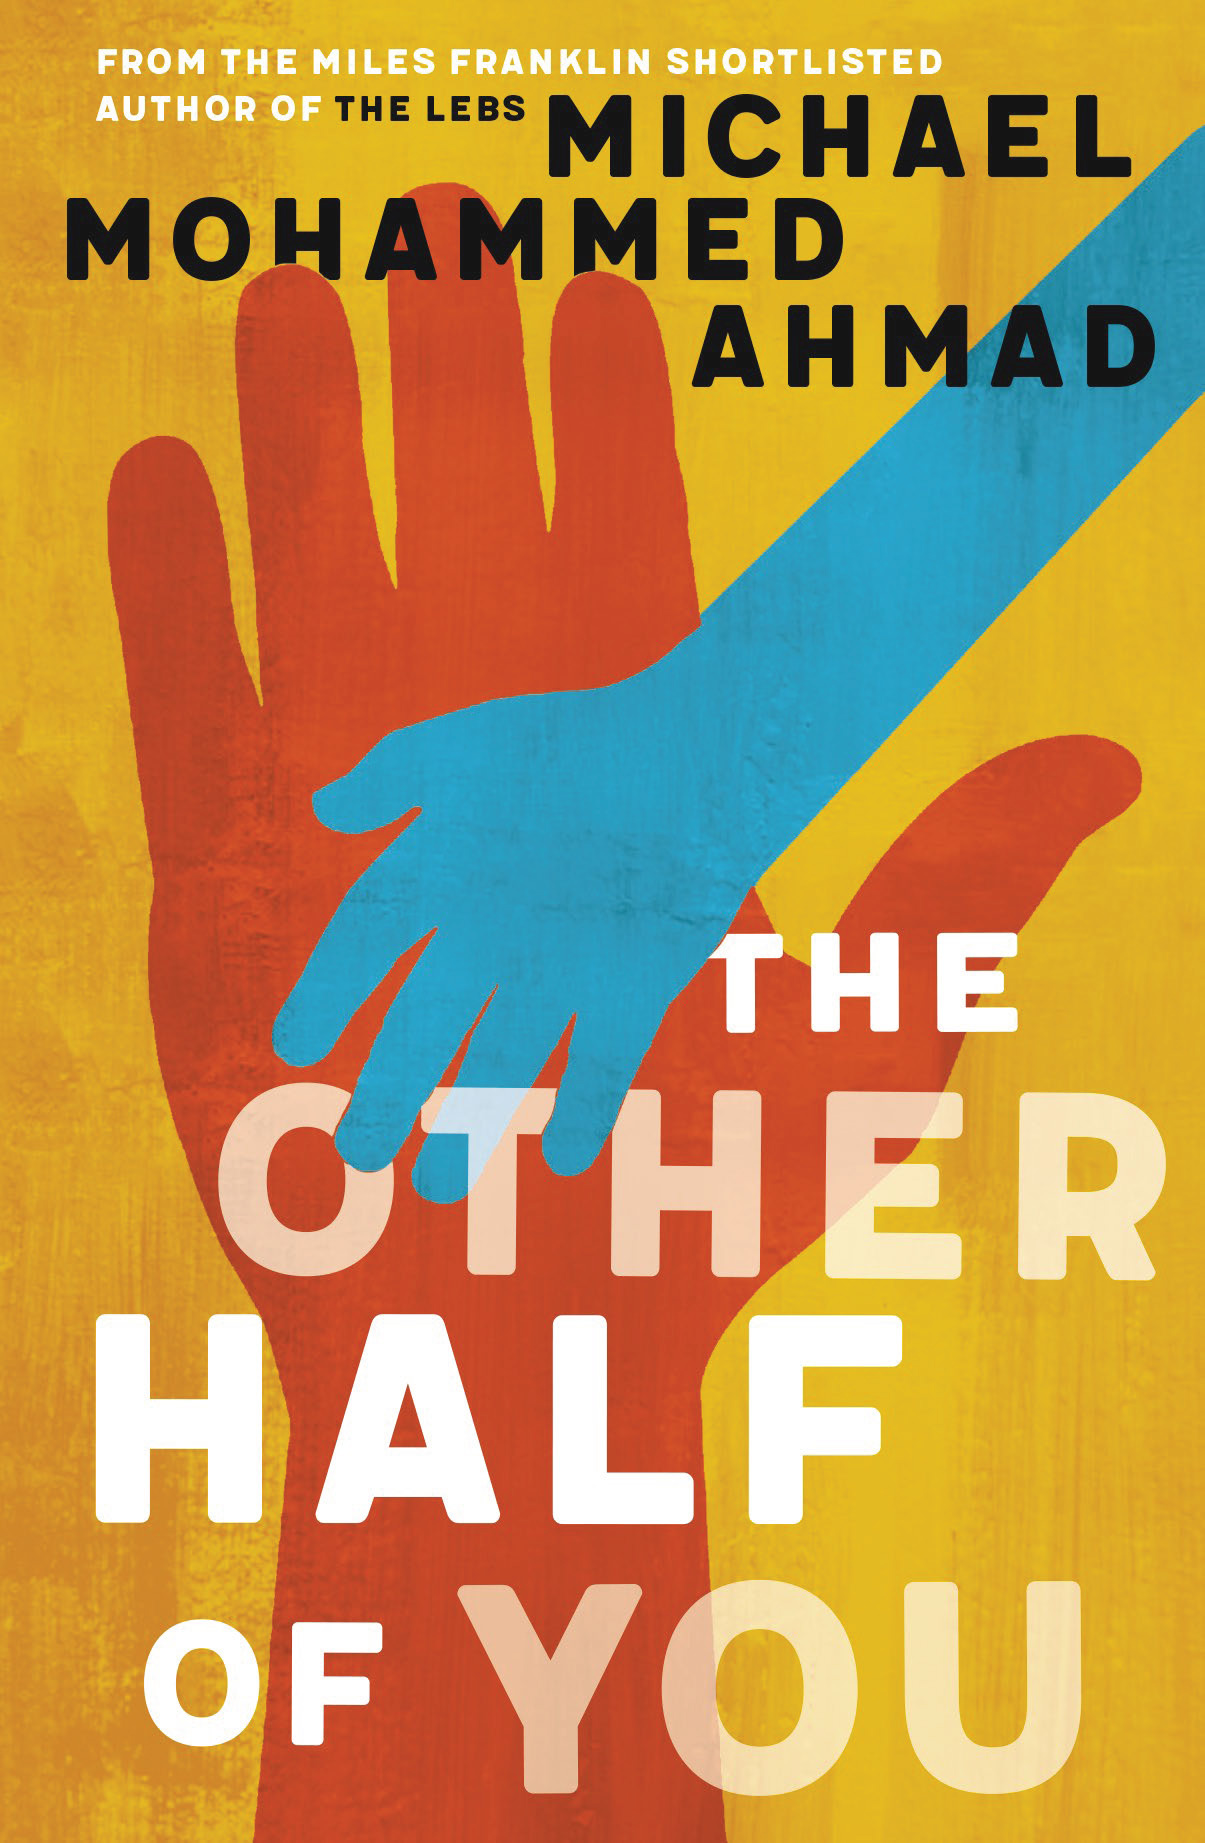 Cover of The Other Half of You by Michael Mohammed Ahmad featuring a painting of large hand with a small hand resting on it.